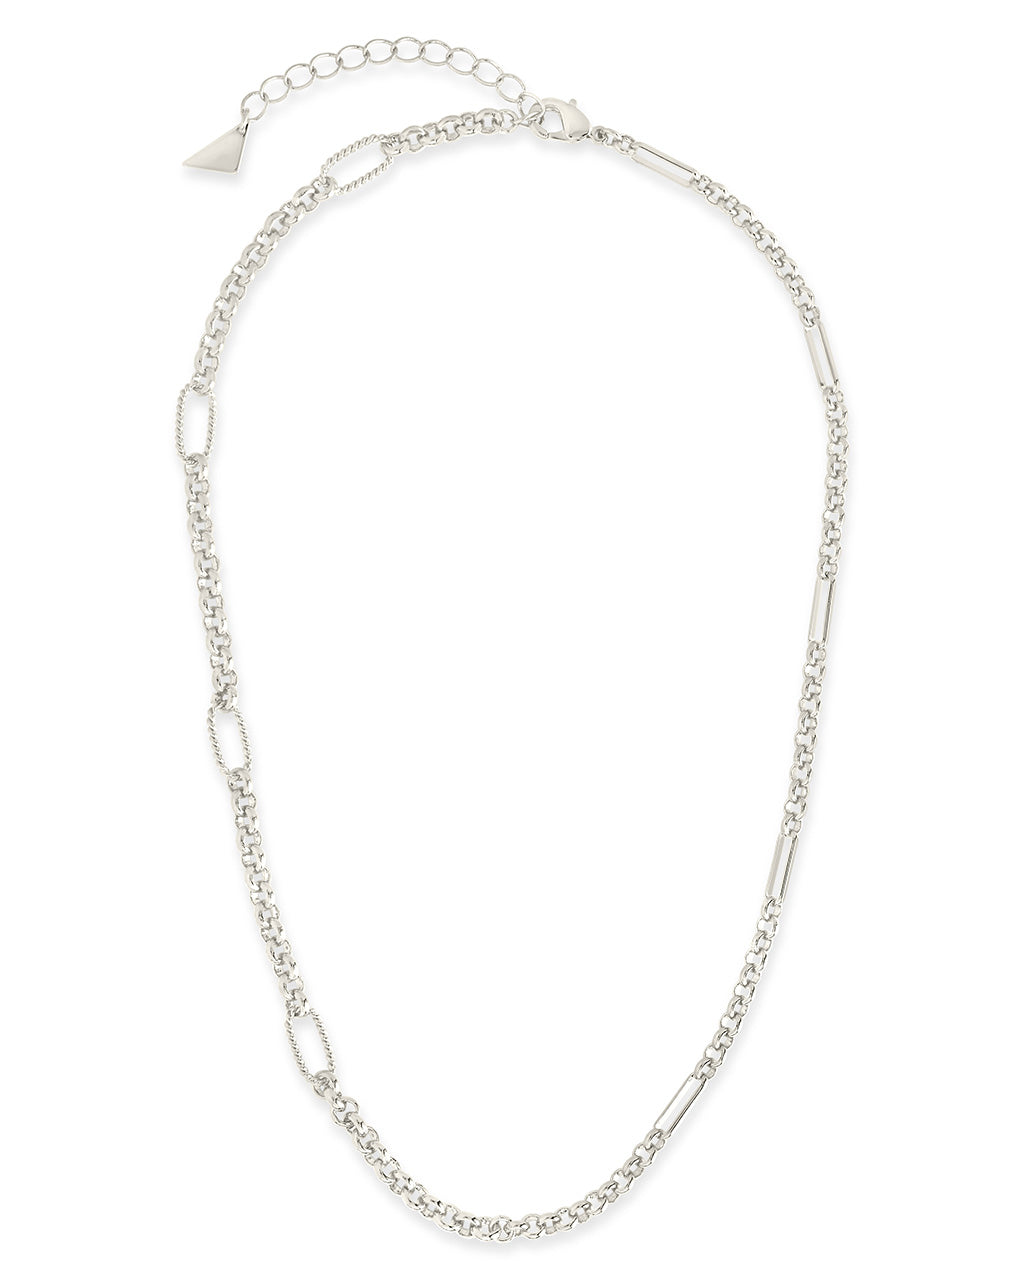 Leisel Chain Necklace Sterling Forever Silver 